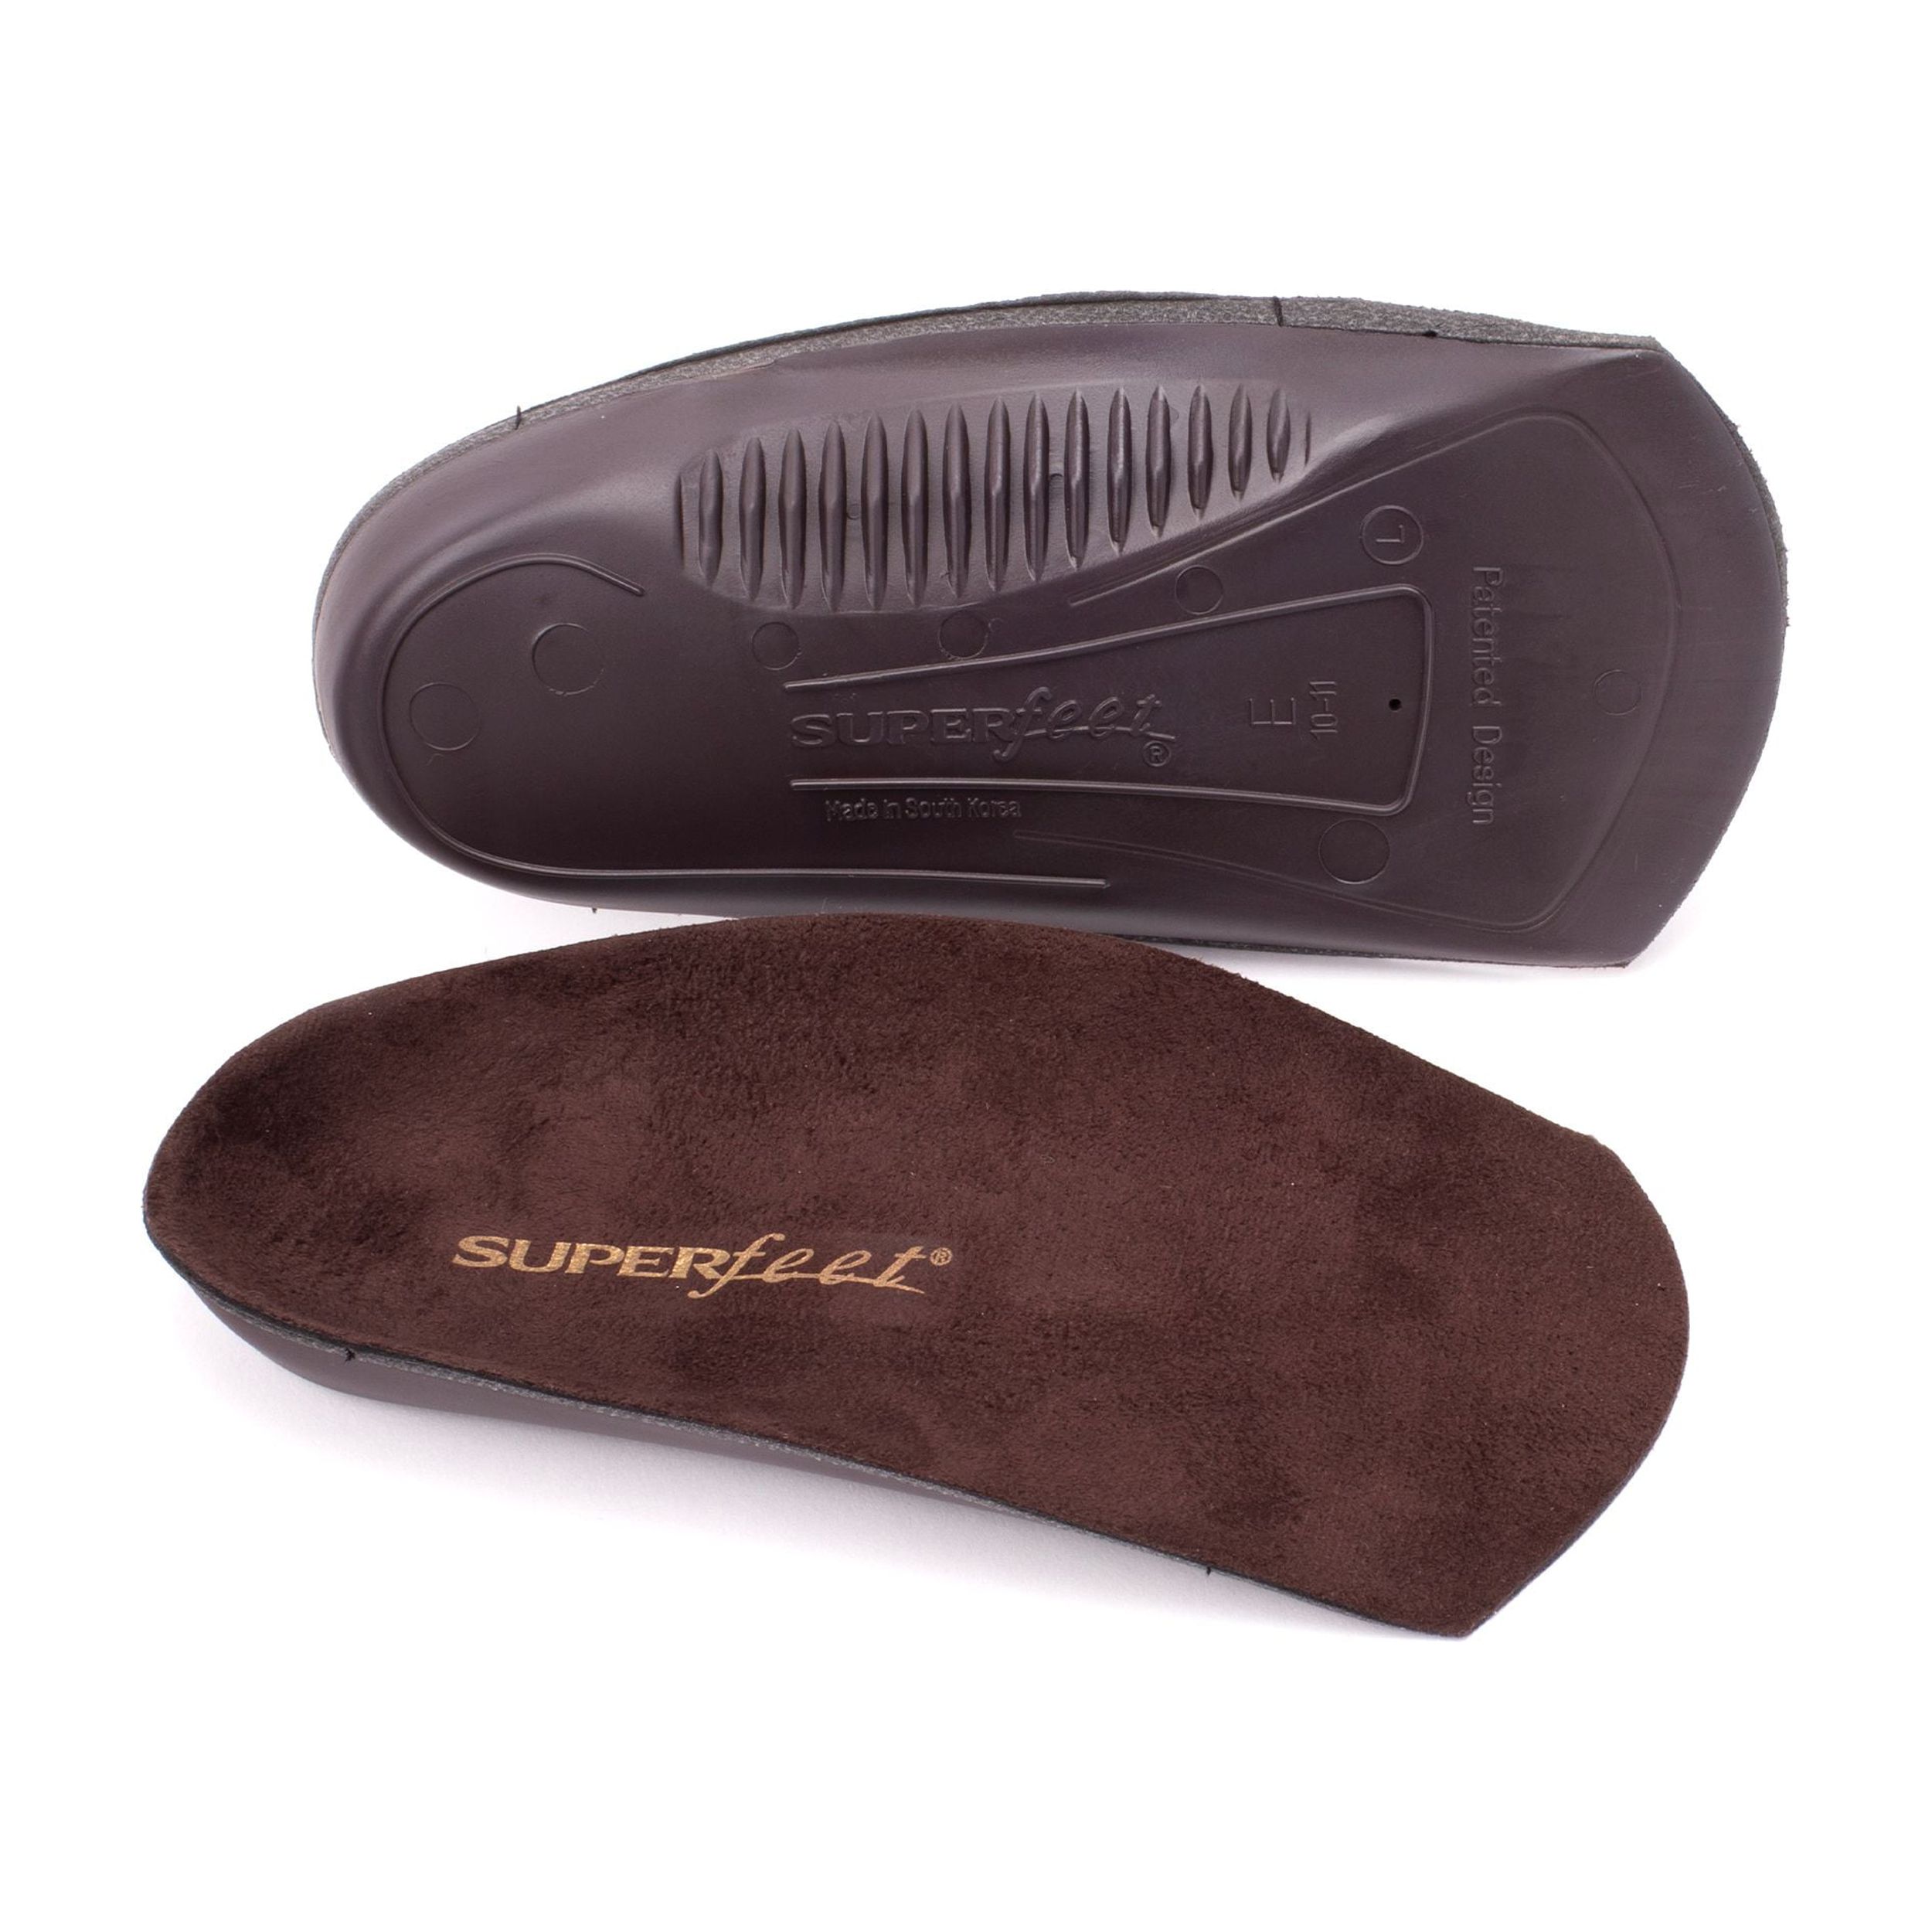 Superfeet Casual Men's Easyfit Insoles - Comfort Shoe Inserts for Men - Anti-Fatigue Orthotic Insoles for Dress Shoes - Professional Grade - Size 7.5-9 Men - image 1 of 6